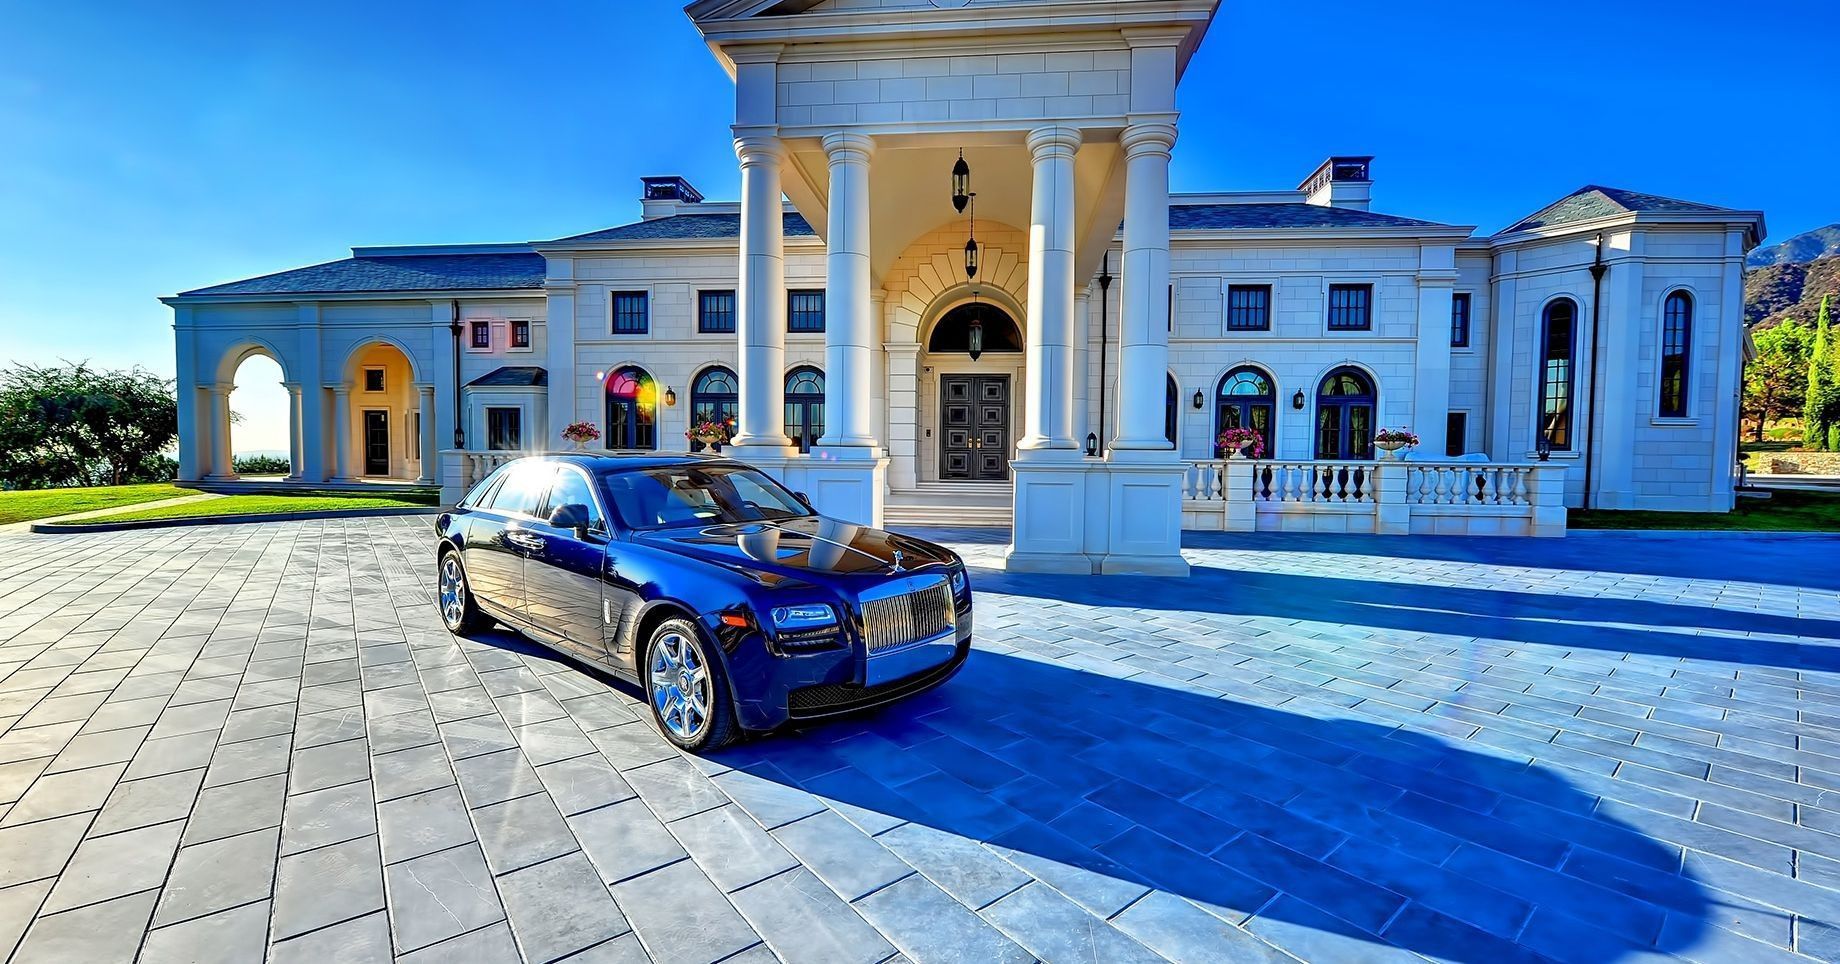 Mansion with Cars Wallpaper Free Mansion with Cars Background